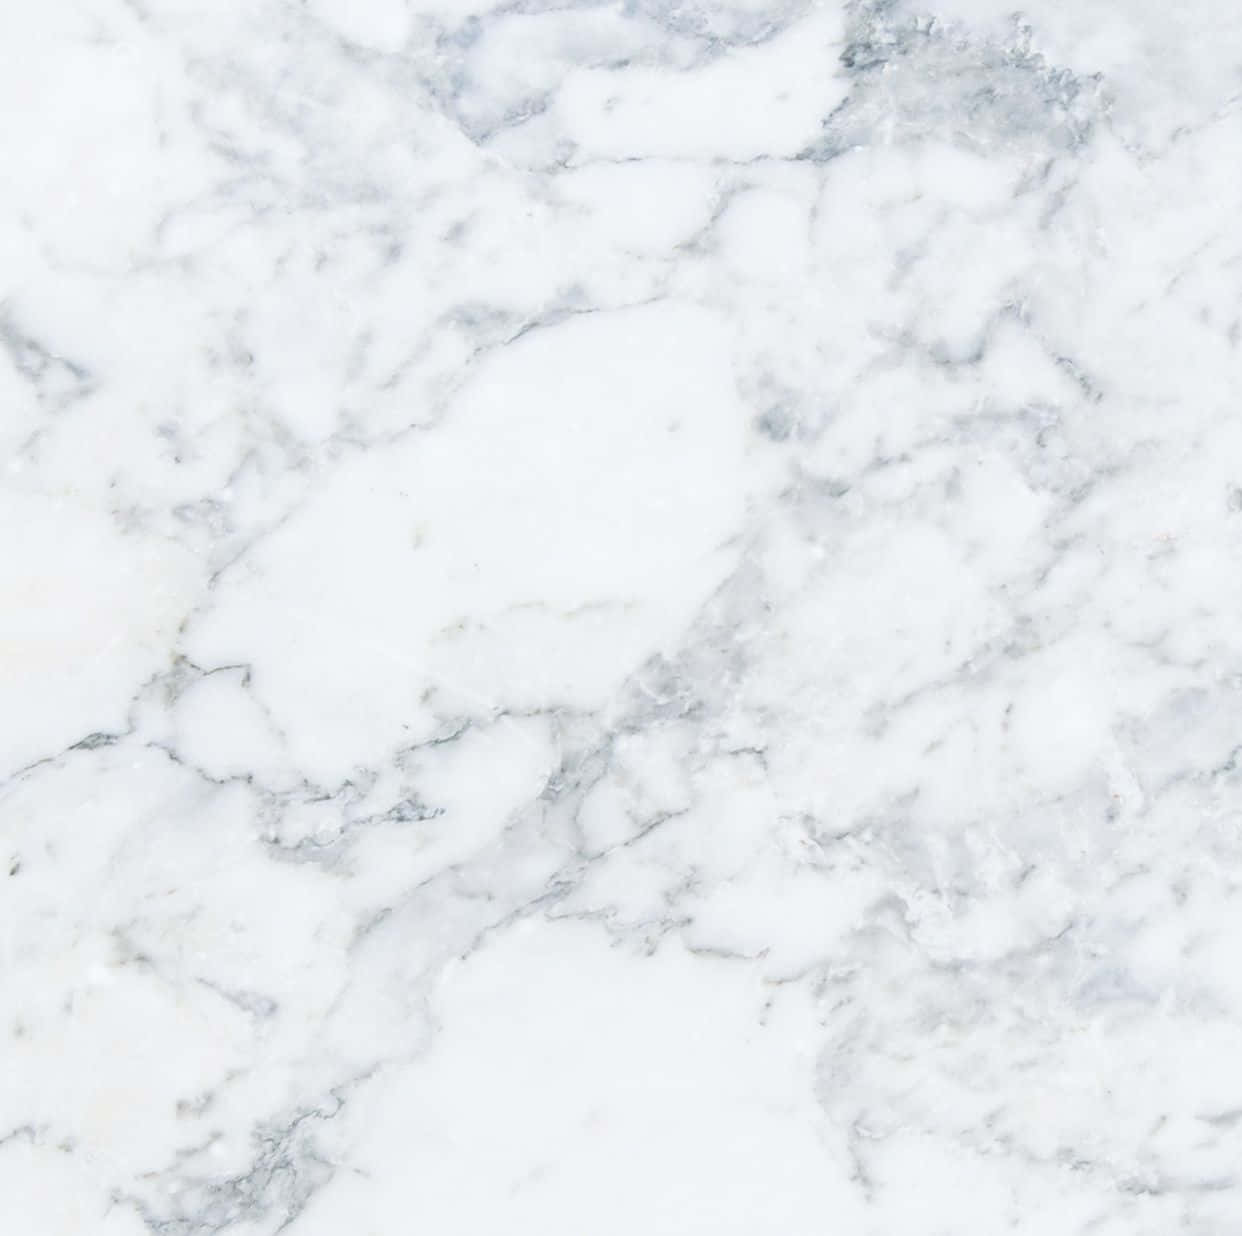 Marble Ipad – the sleek option to stay connected Wallpaper